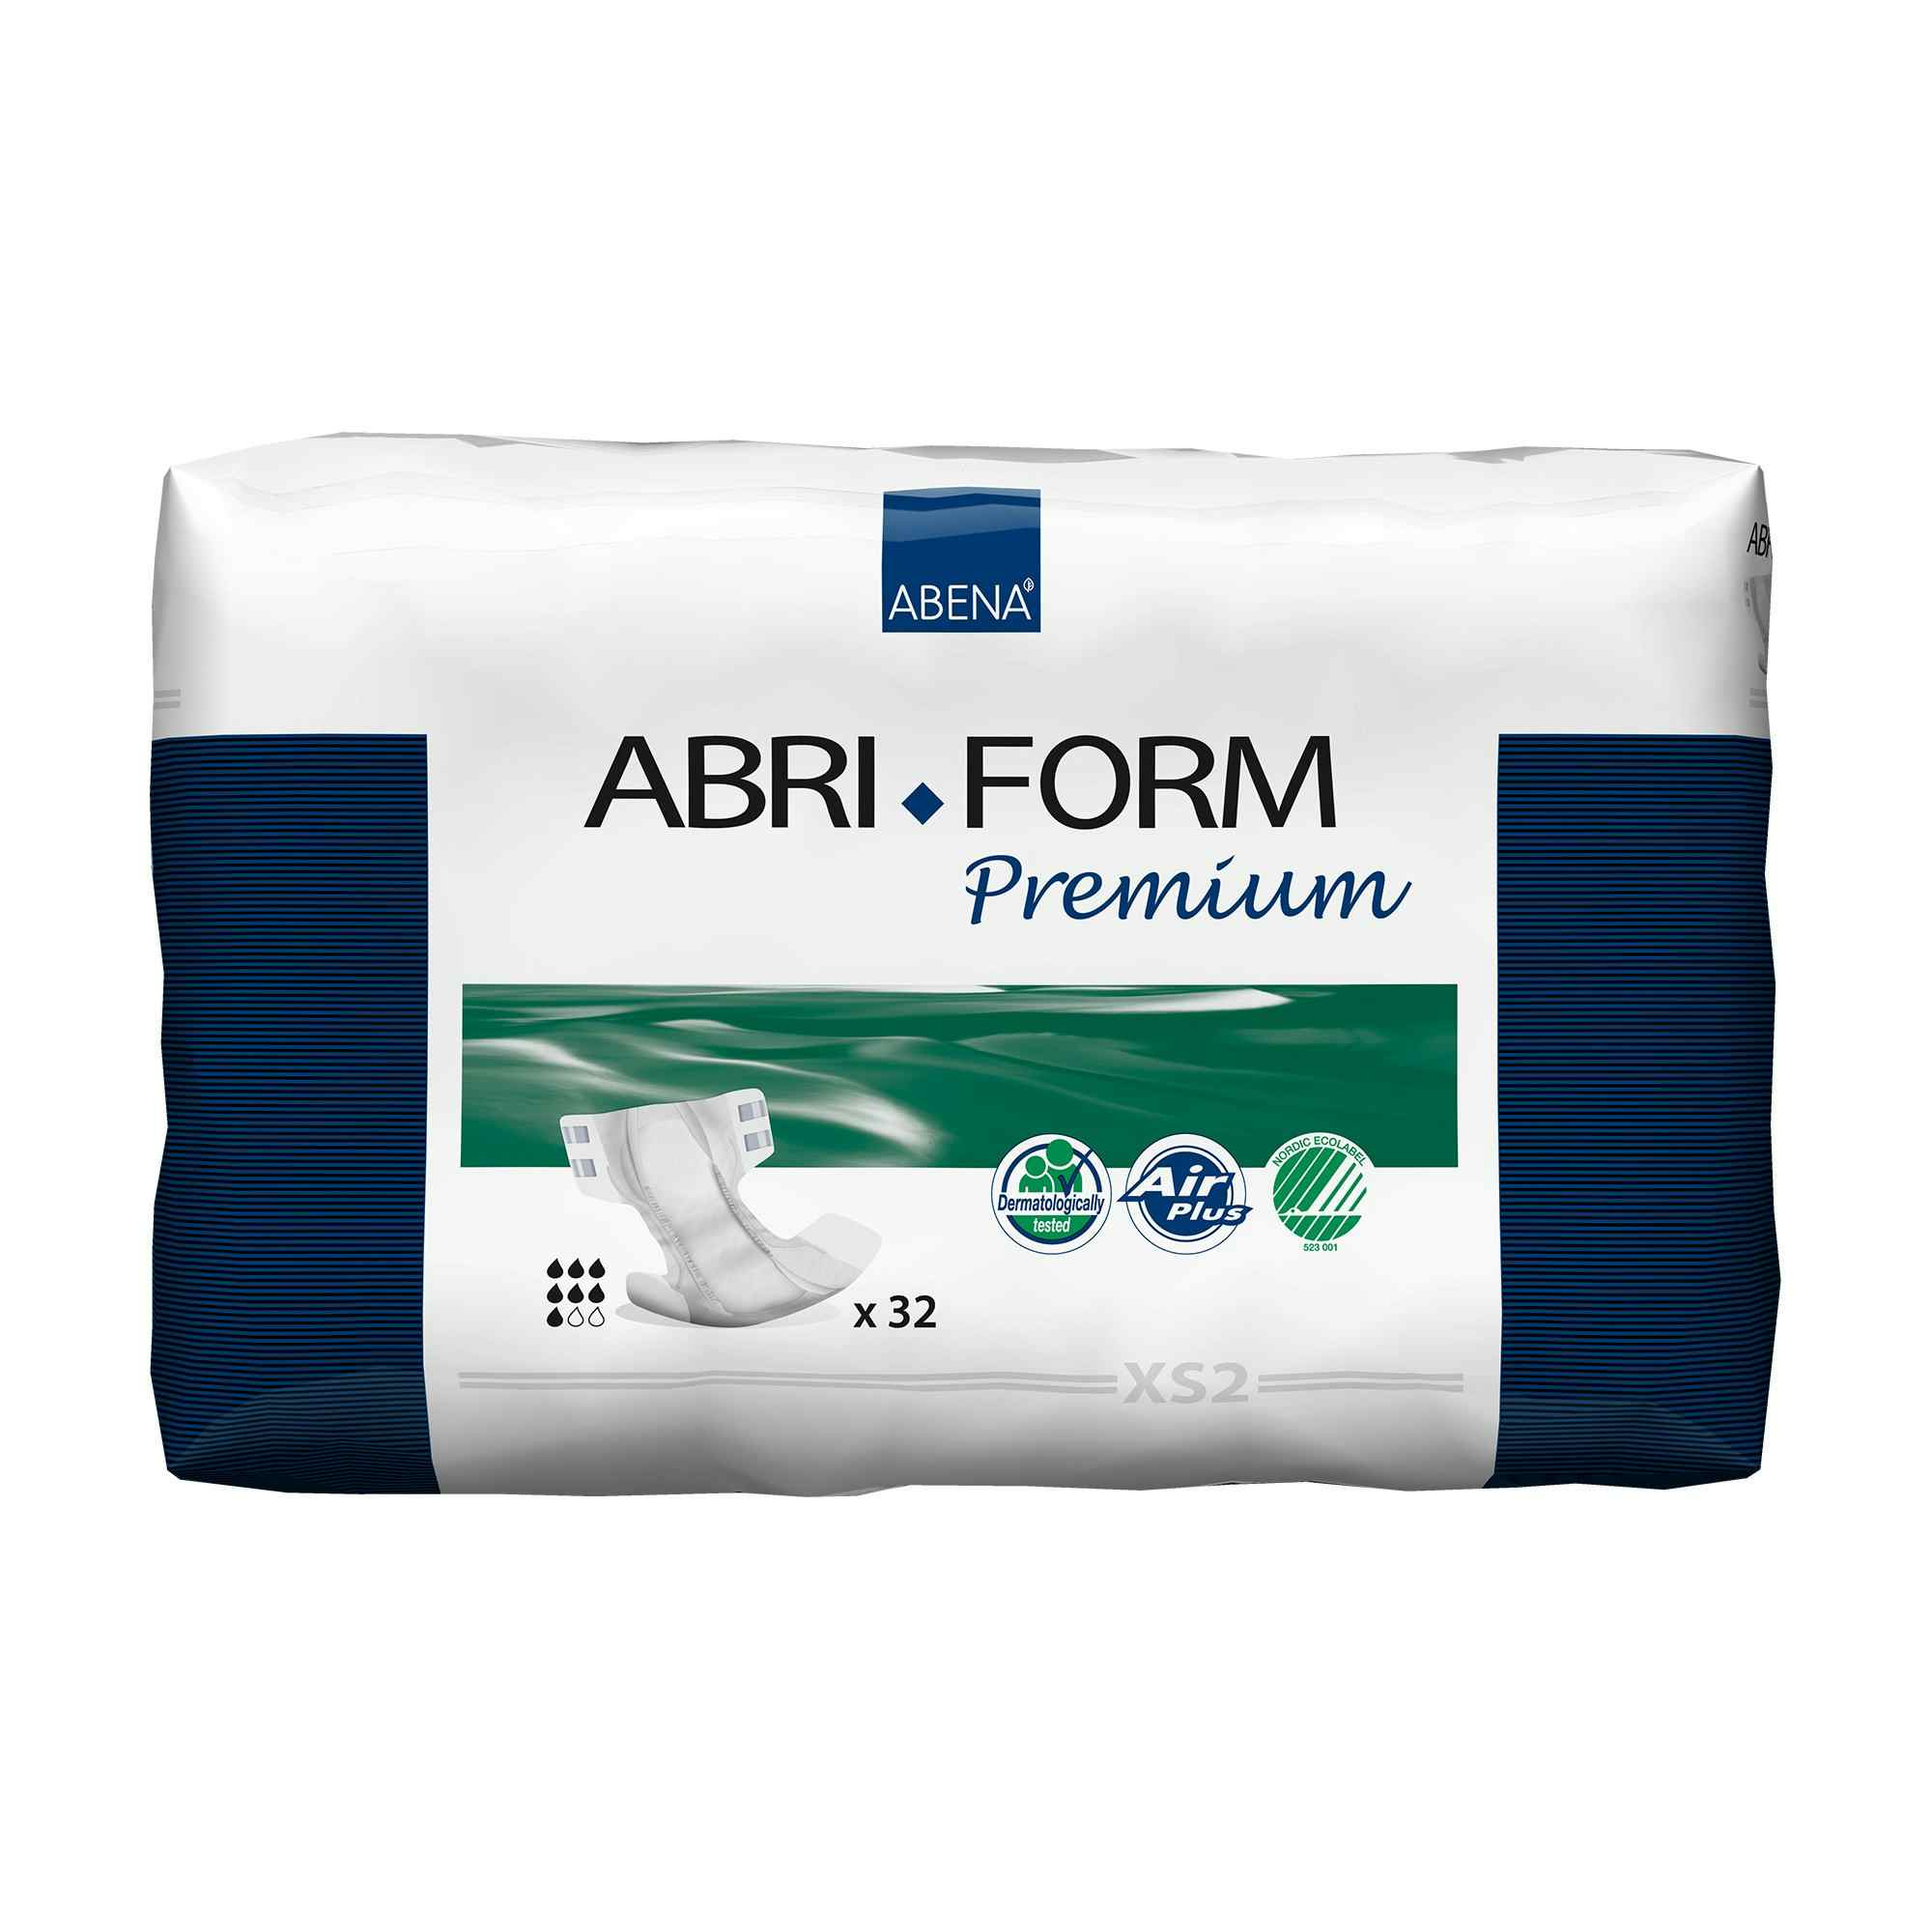 Abri-Form Premium XS2 Unisex Adult Disposable Diaper with tabs, Heavy Absorbency, 43054, X-Small (20-24") - Bag of 32